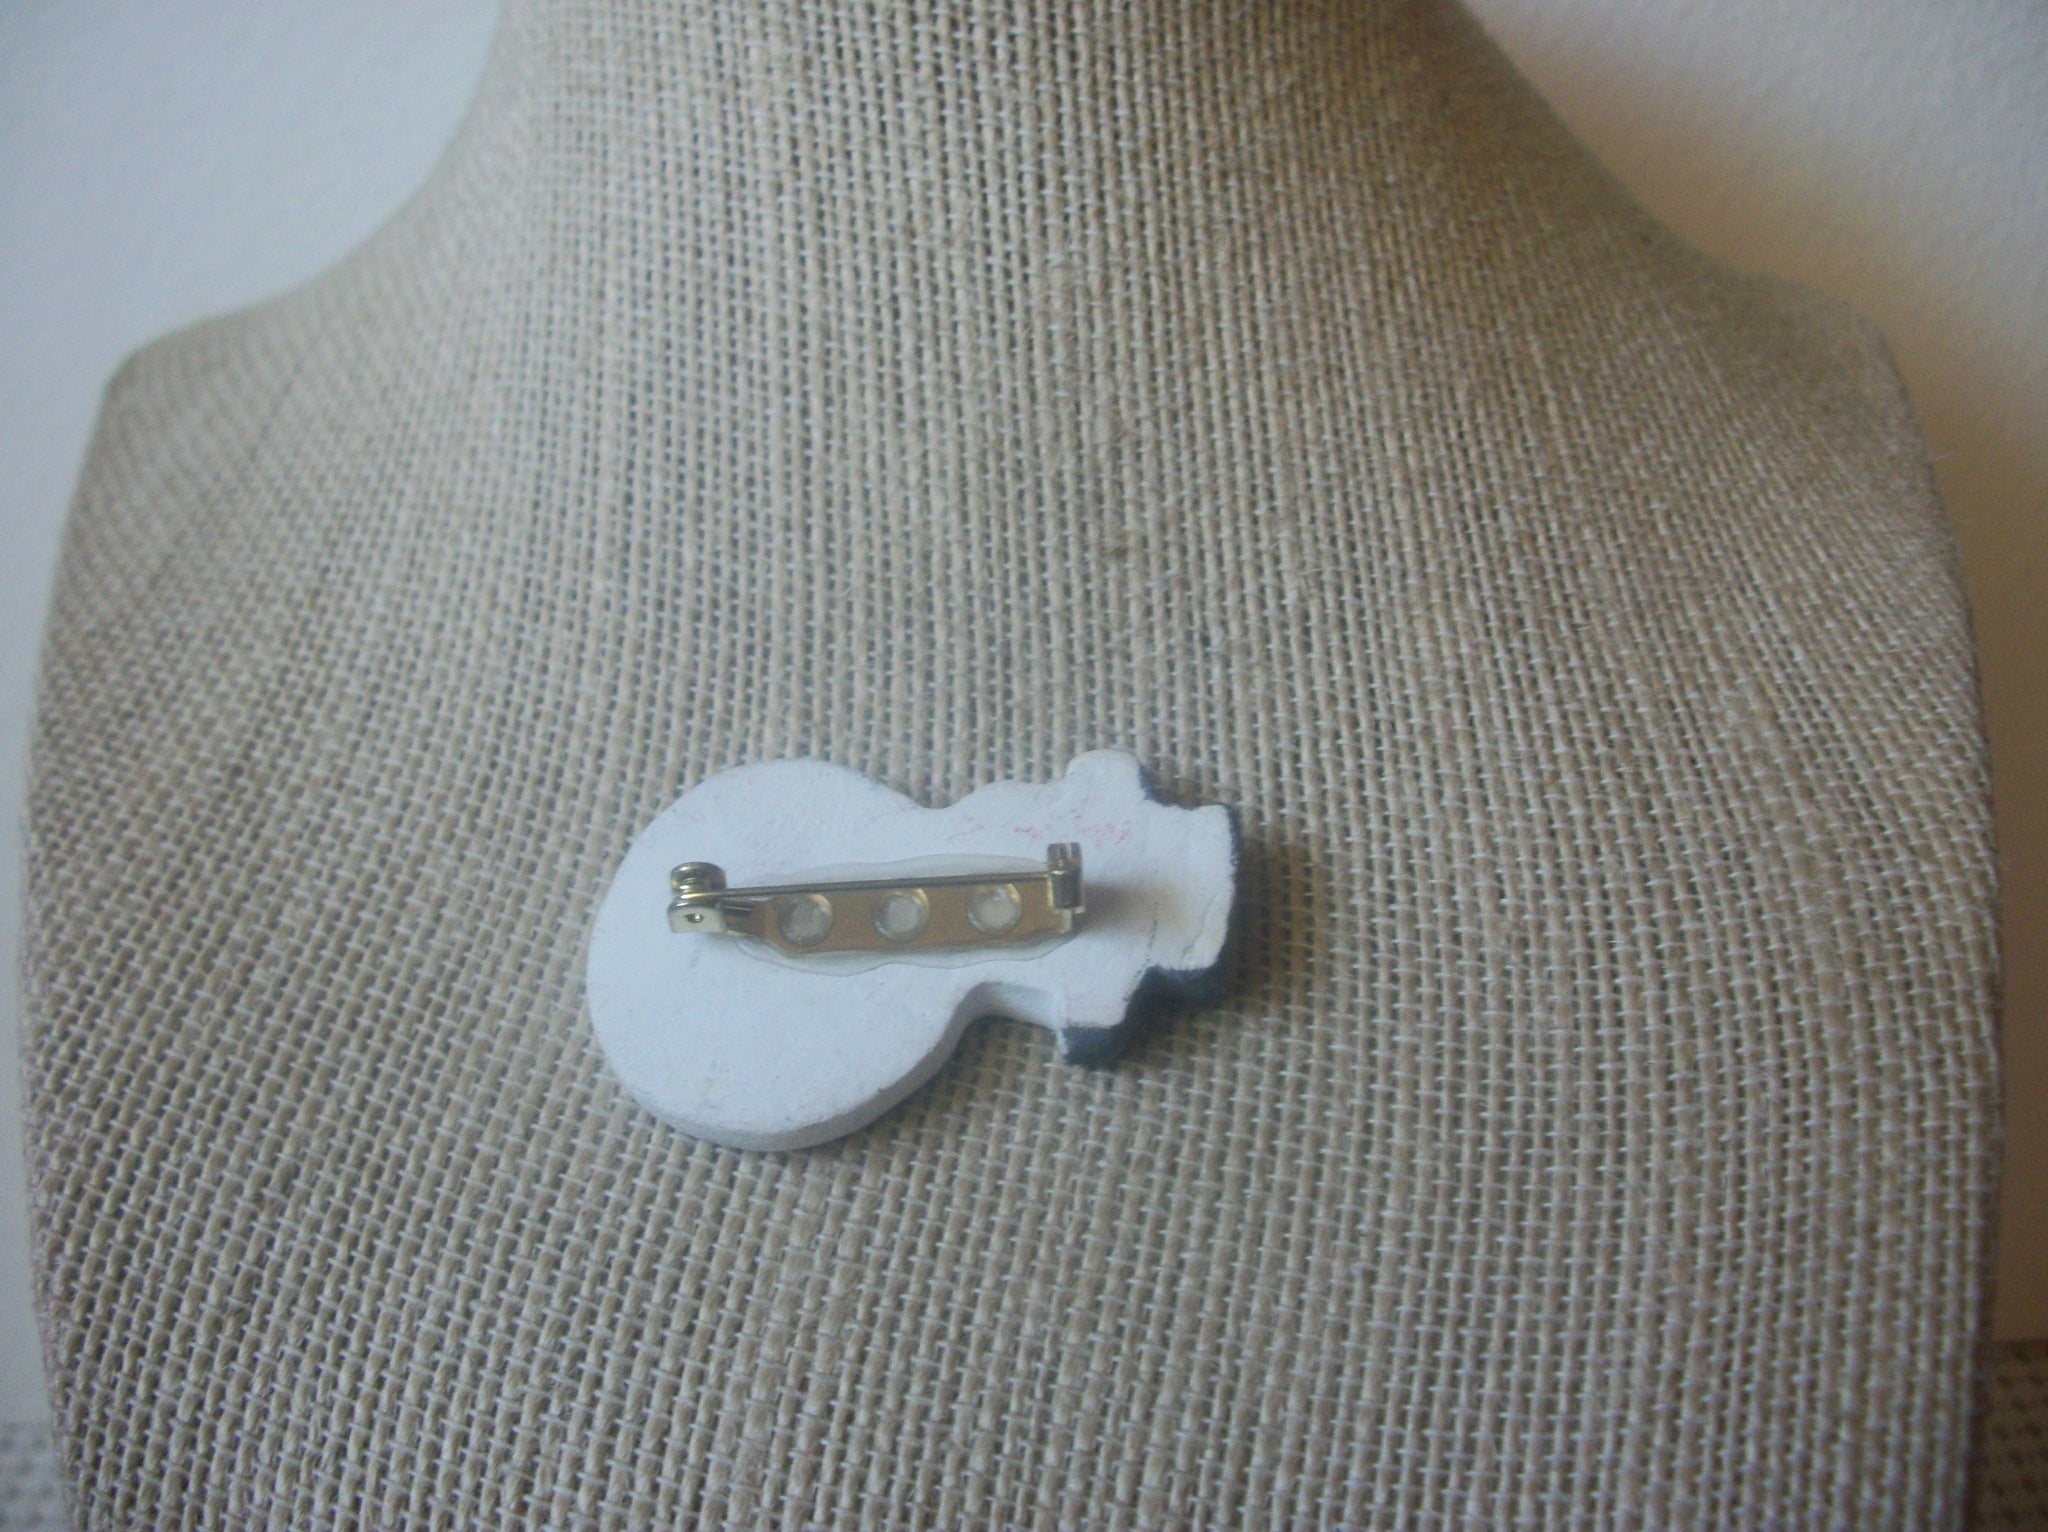 Vintage Brooch Pin, Happy Snowman, Hand Painted, Ceramic, 022021